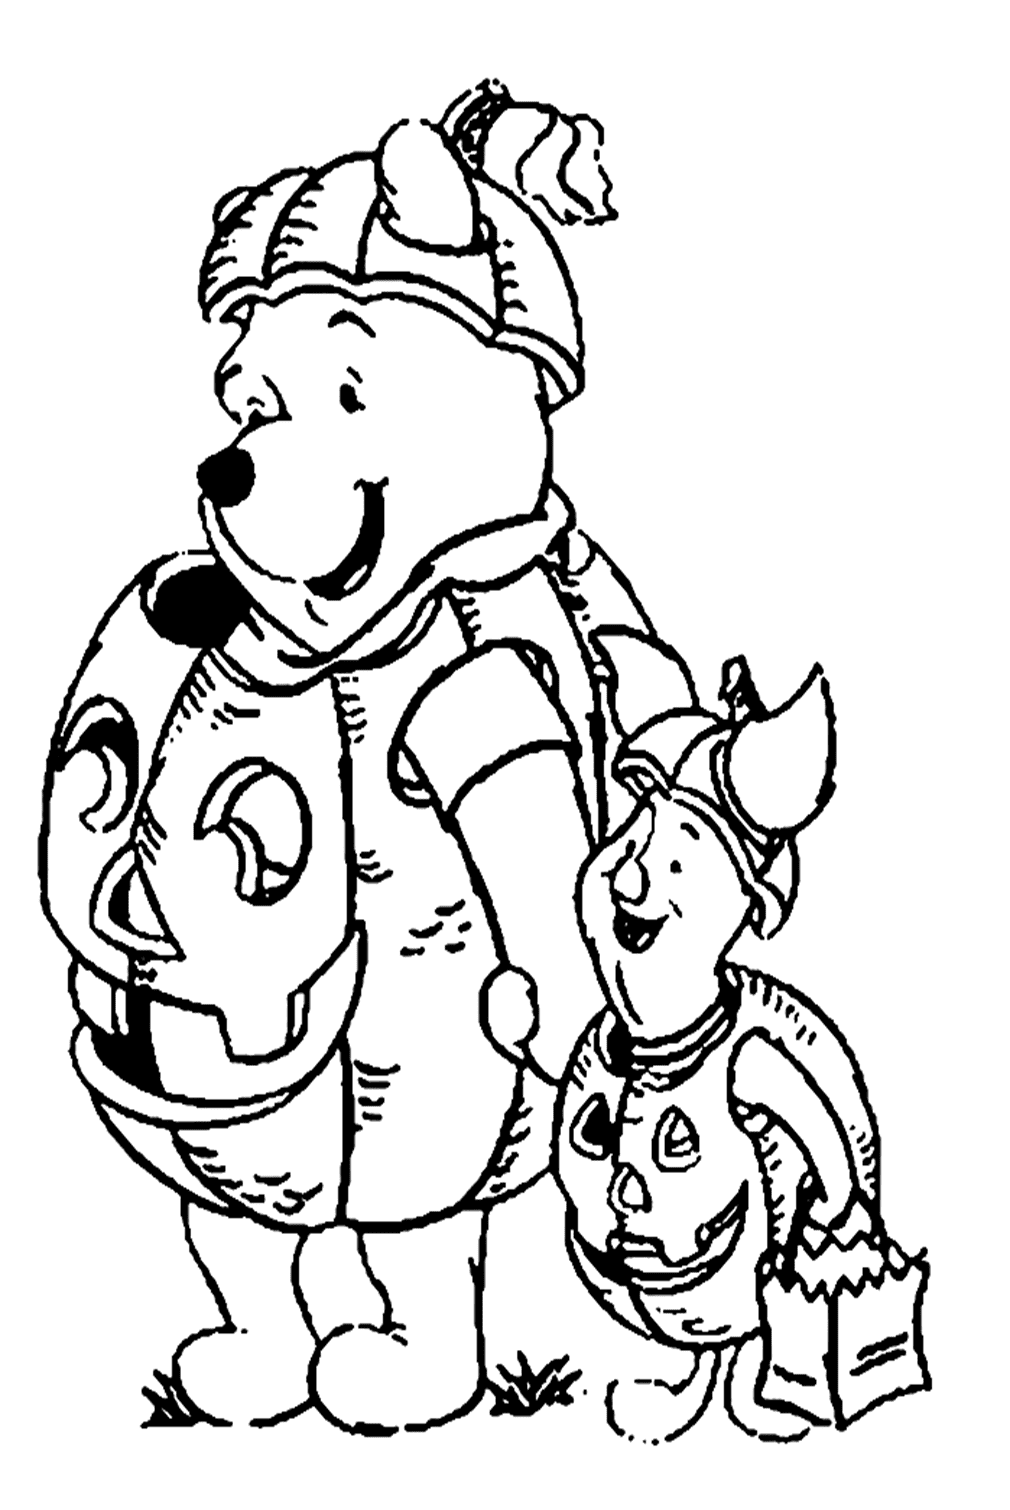 Pooh With Piglet On Halloween Day Coloring Pages